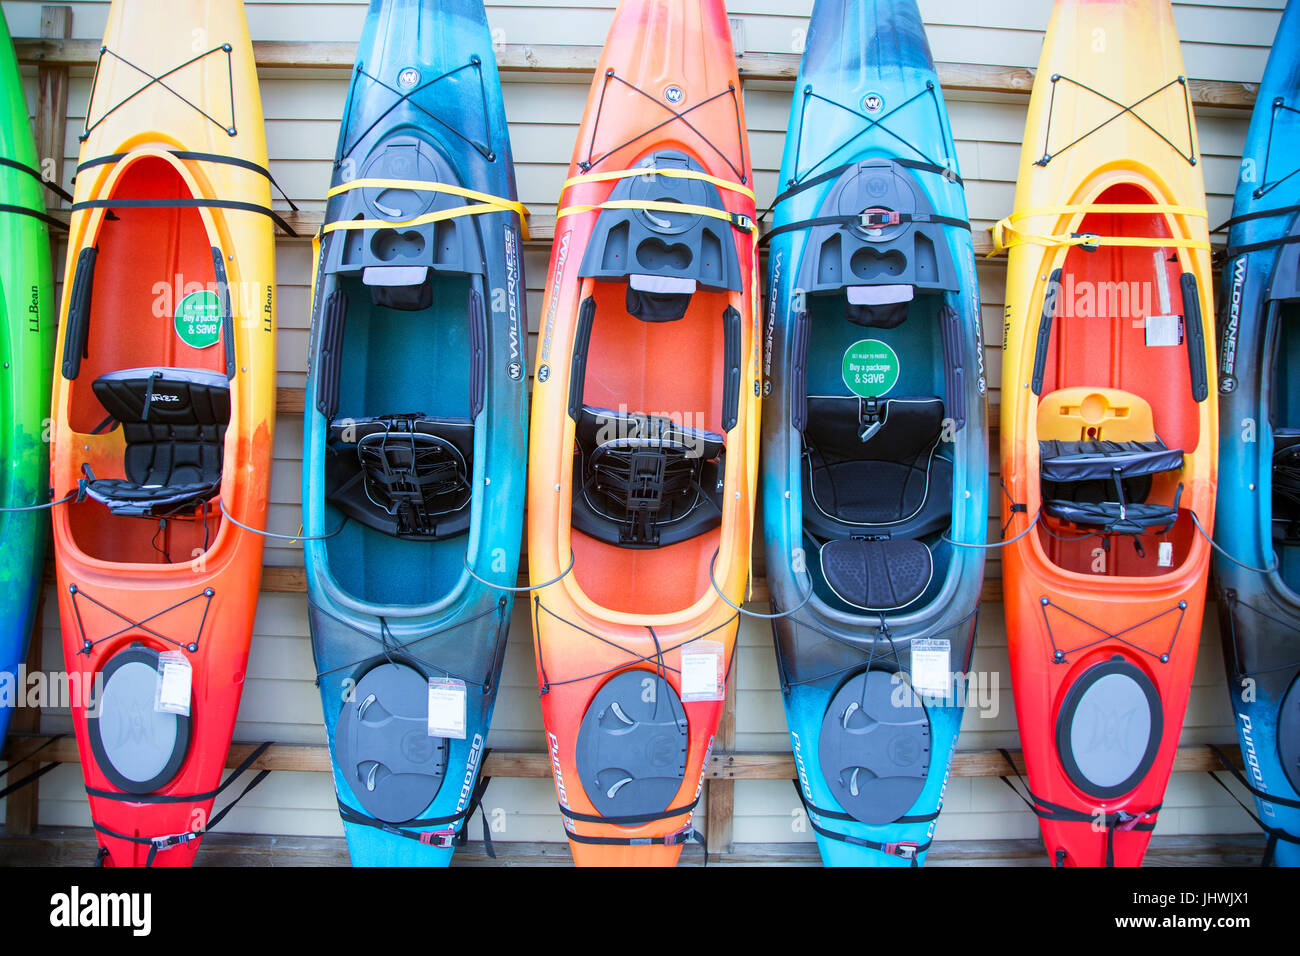 Kayaks For Sale High Resolution Stock Photography and Images - Alamy